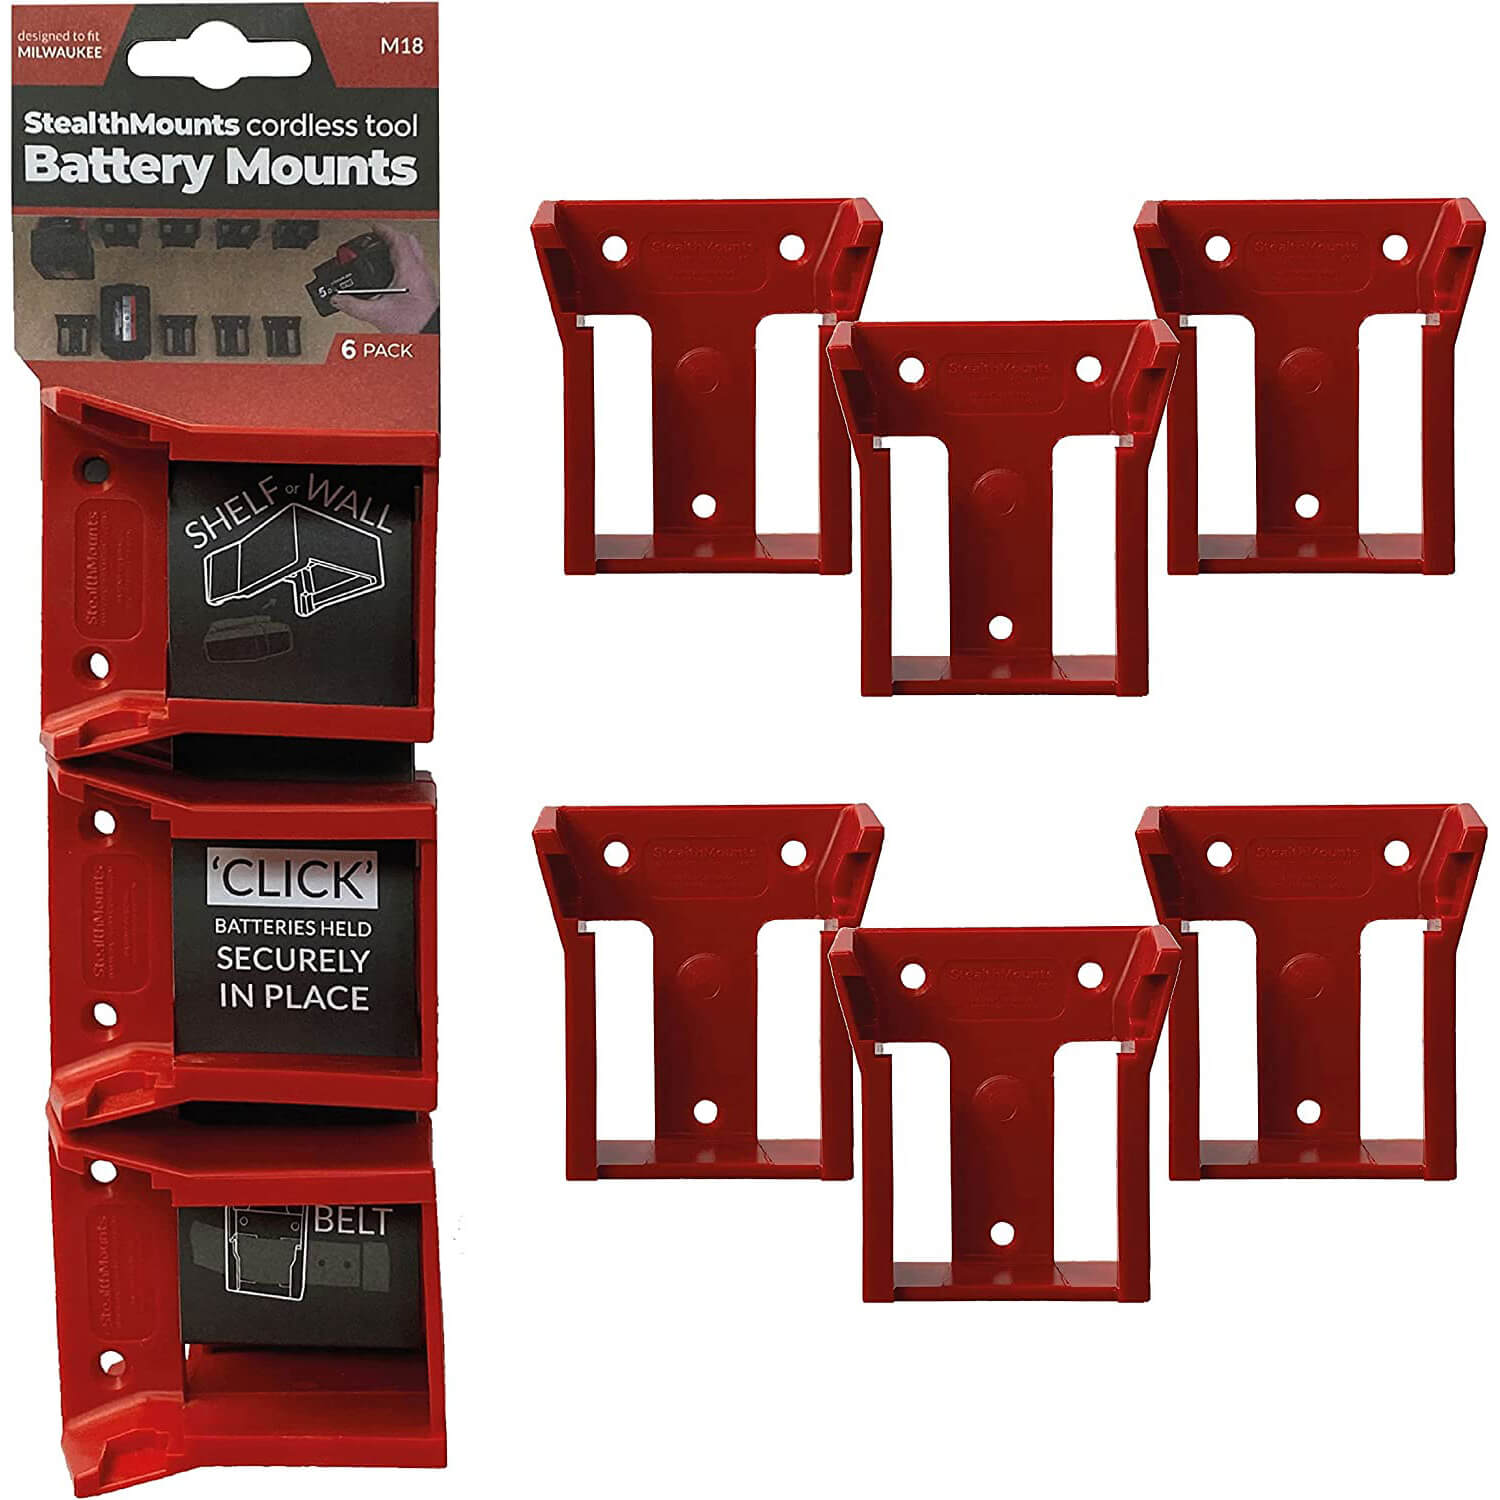 Image of Stealth Mounts 6 Pack Battery Mounts For Milwaukee 18V M18 Batteries Red